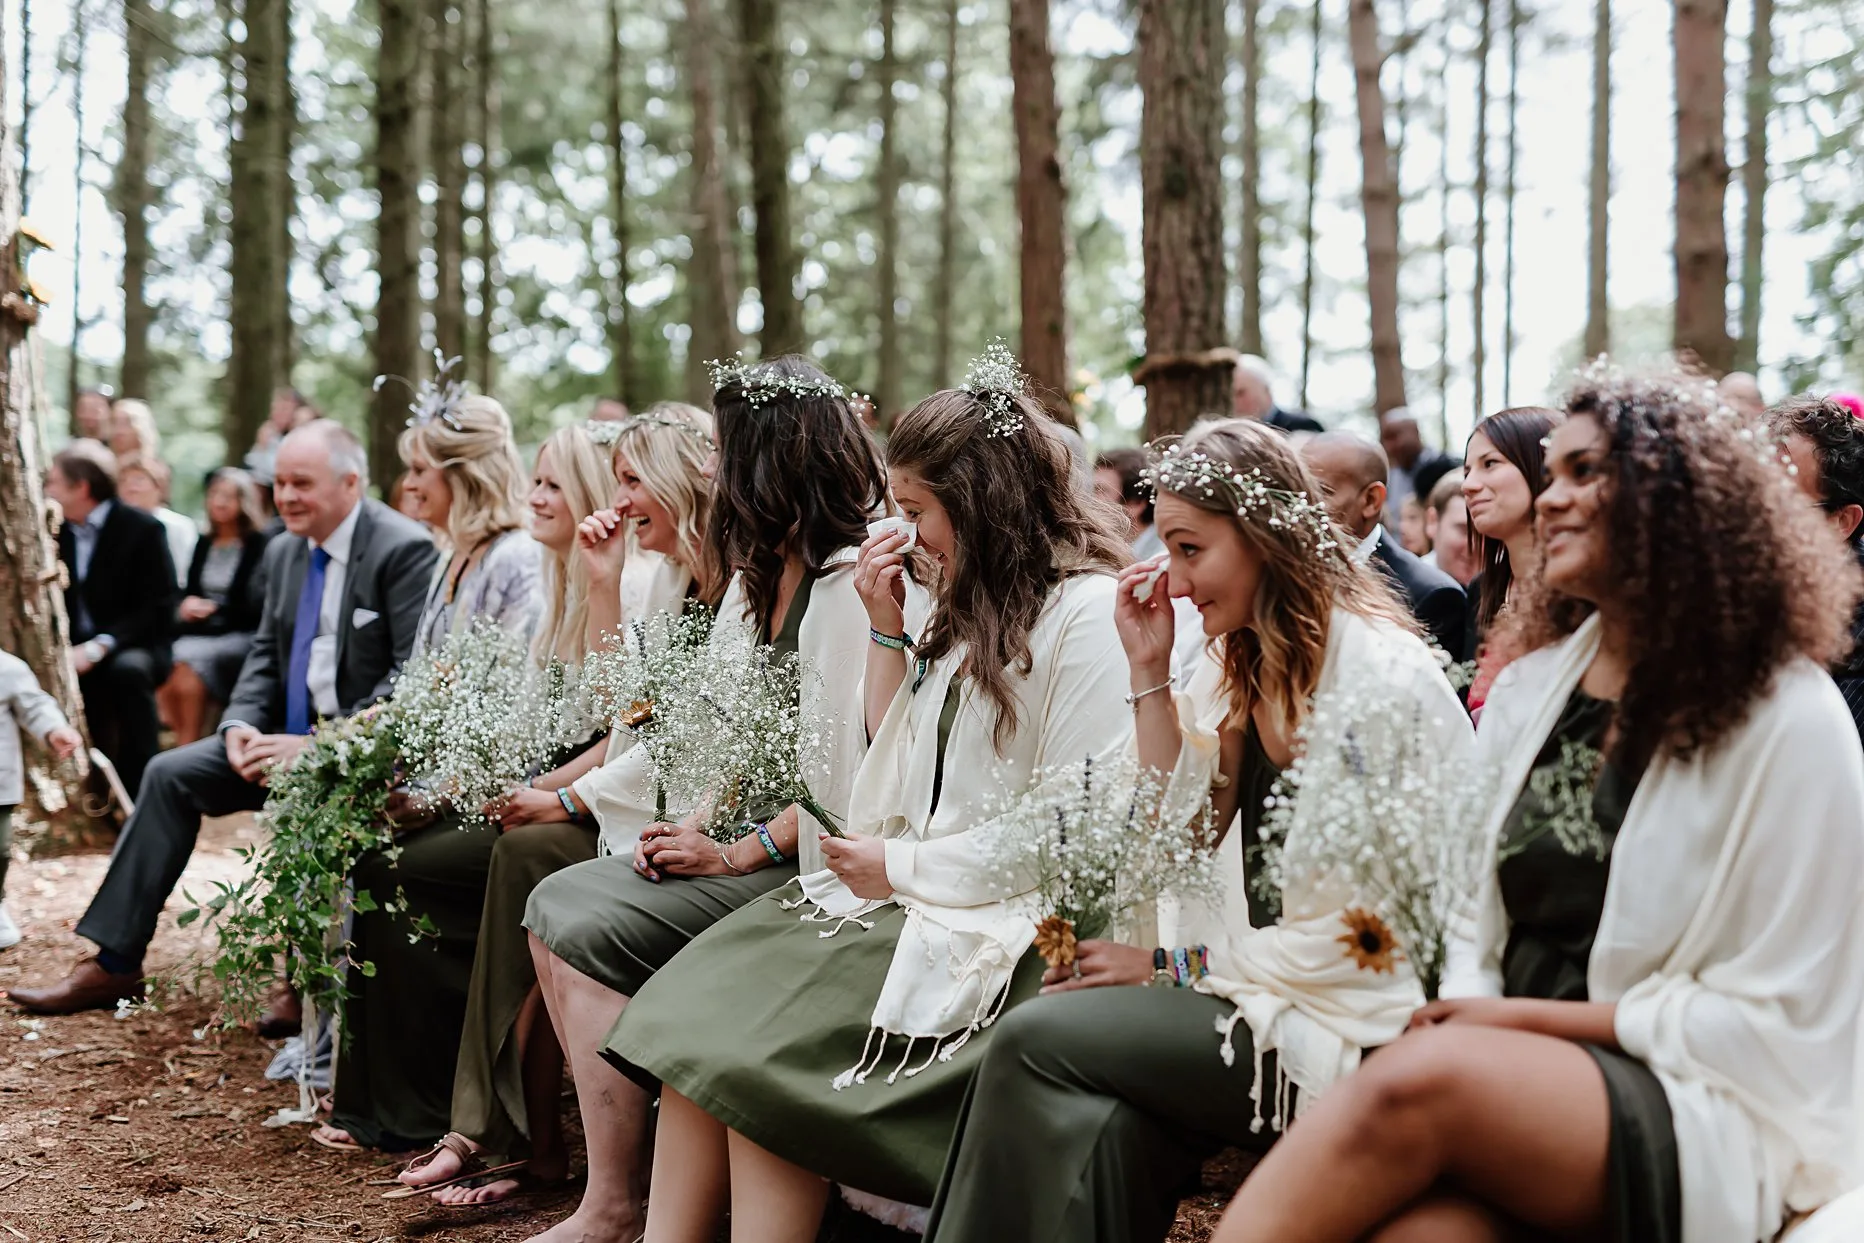 Bridesmaids crying during a woodland wedding ceremony.